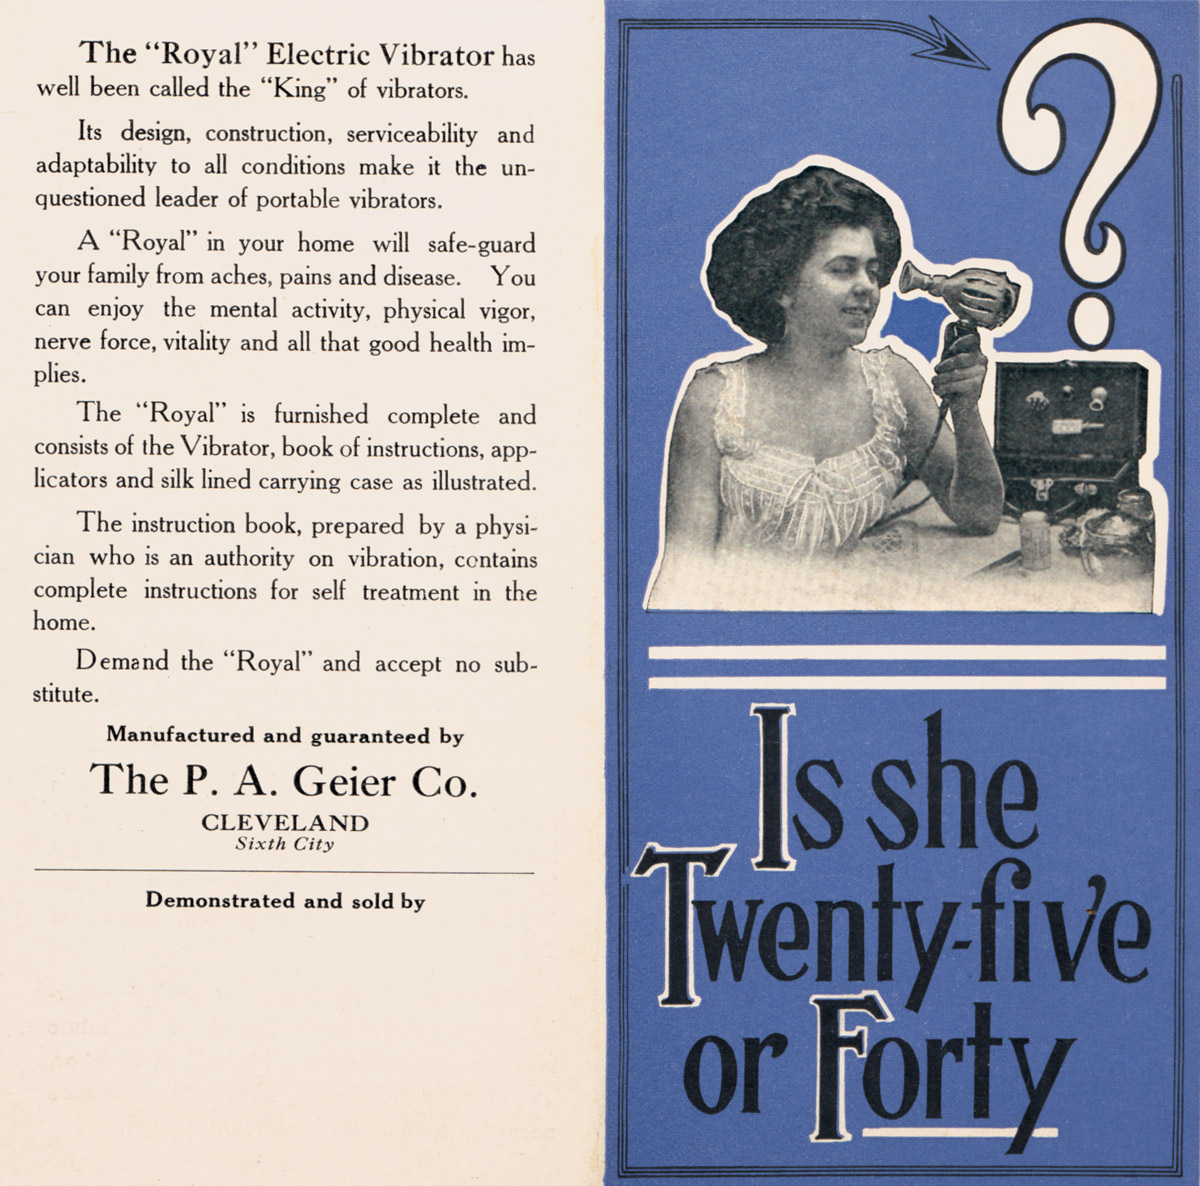 Undated advertising pamphlet for the Royal Electric Vibrator published by the P. A. Geier Company. 